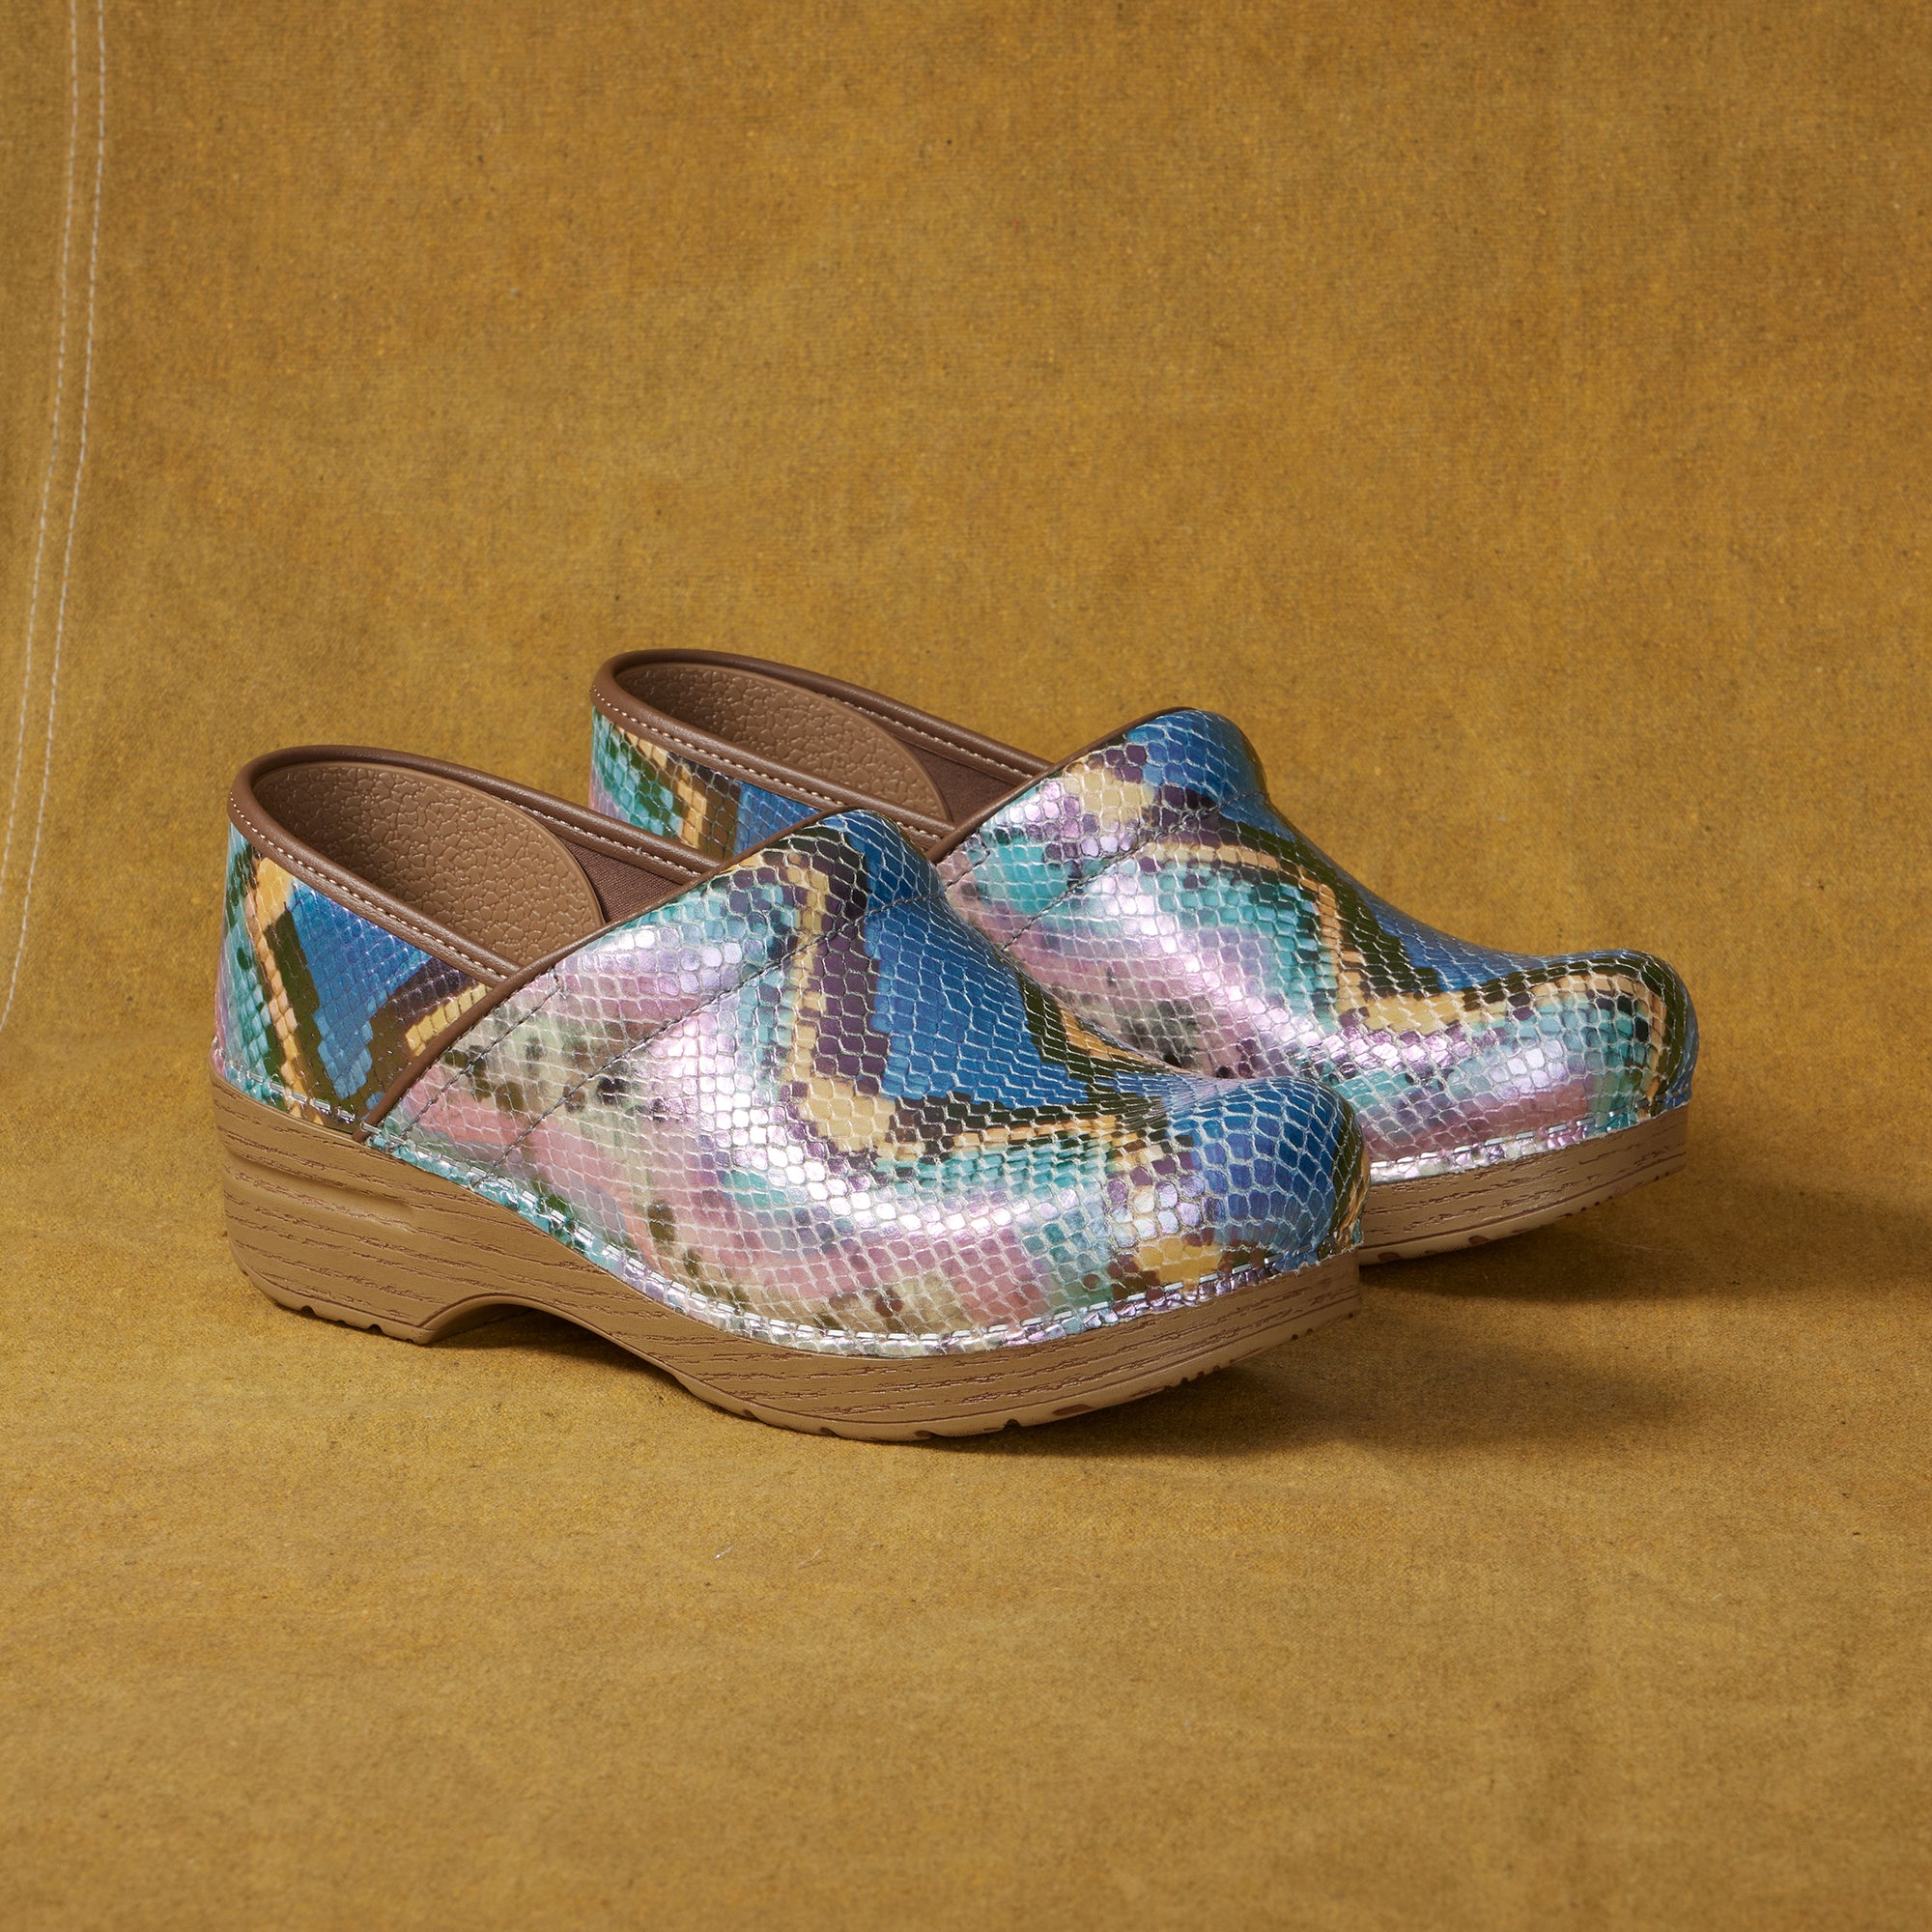 A close up of multicolored mermaid clogs.